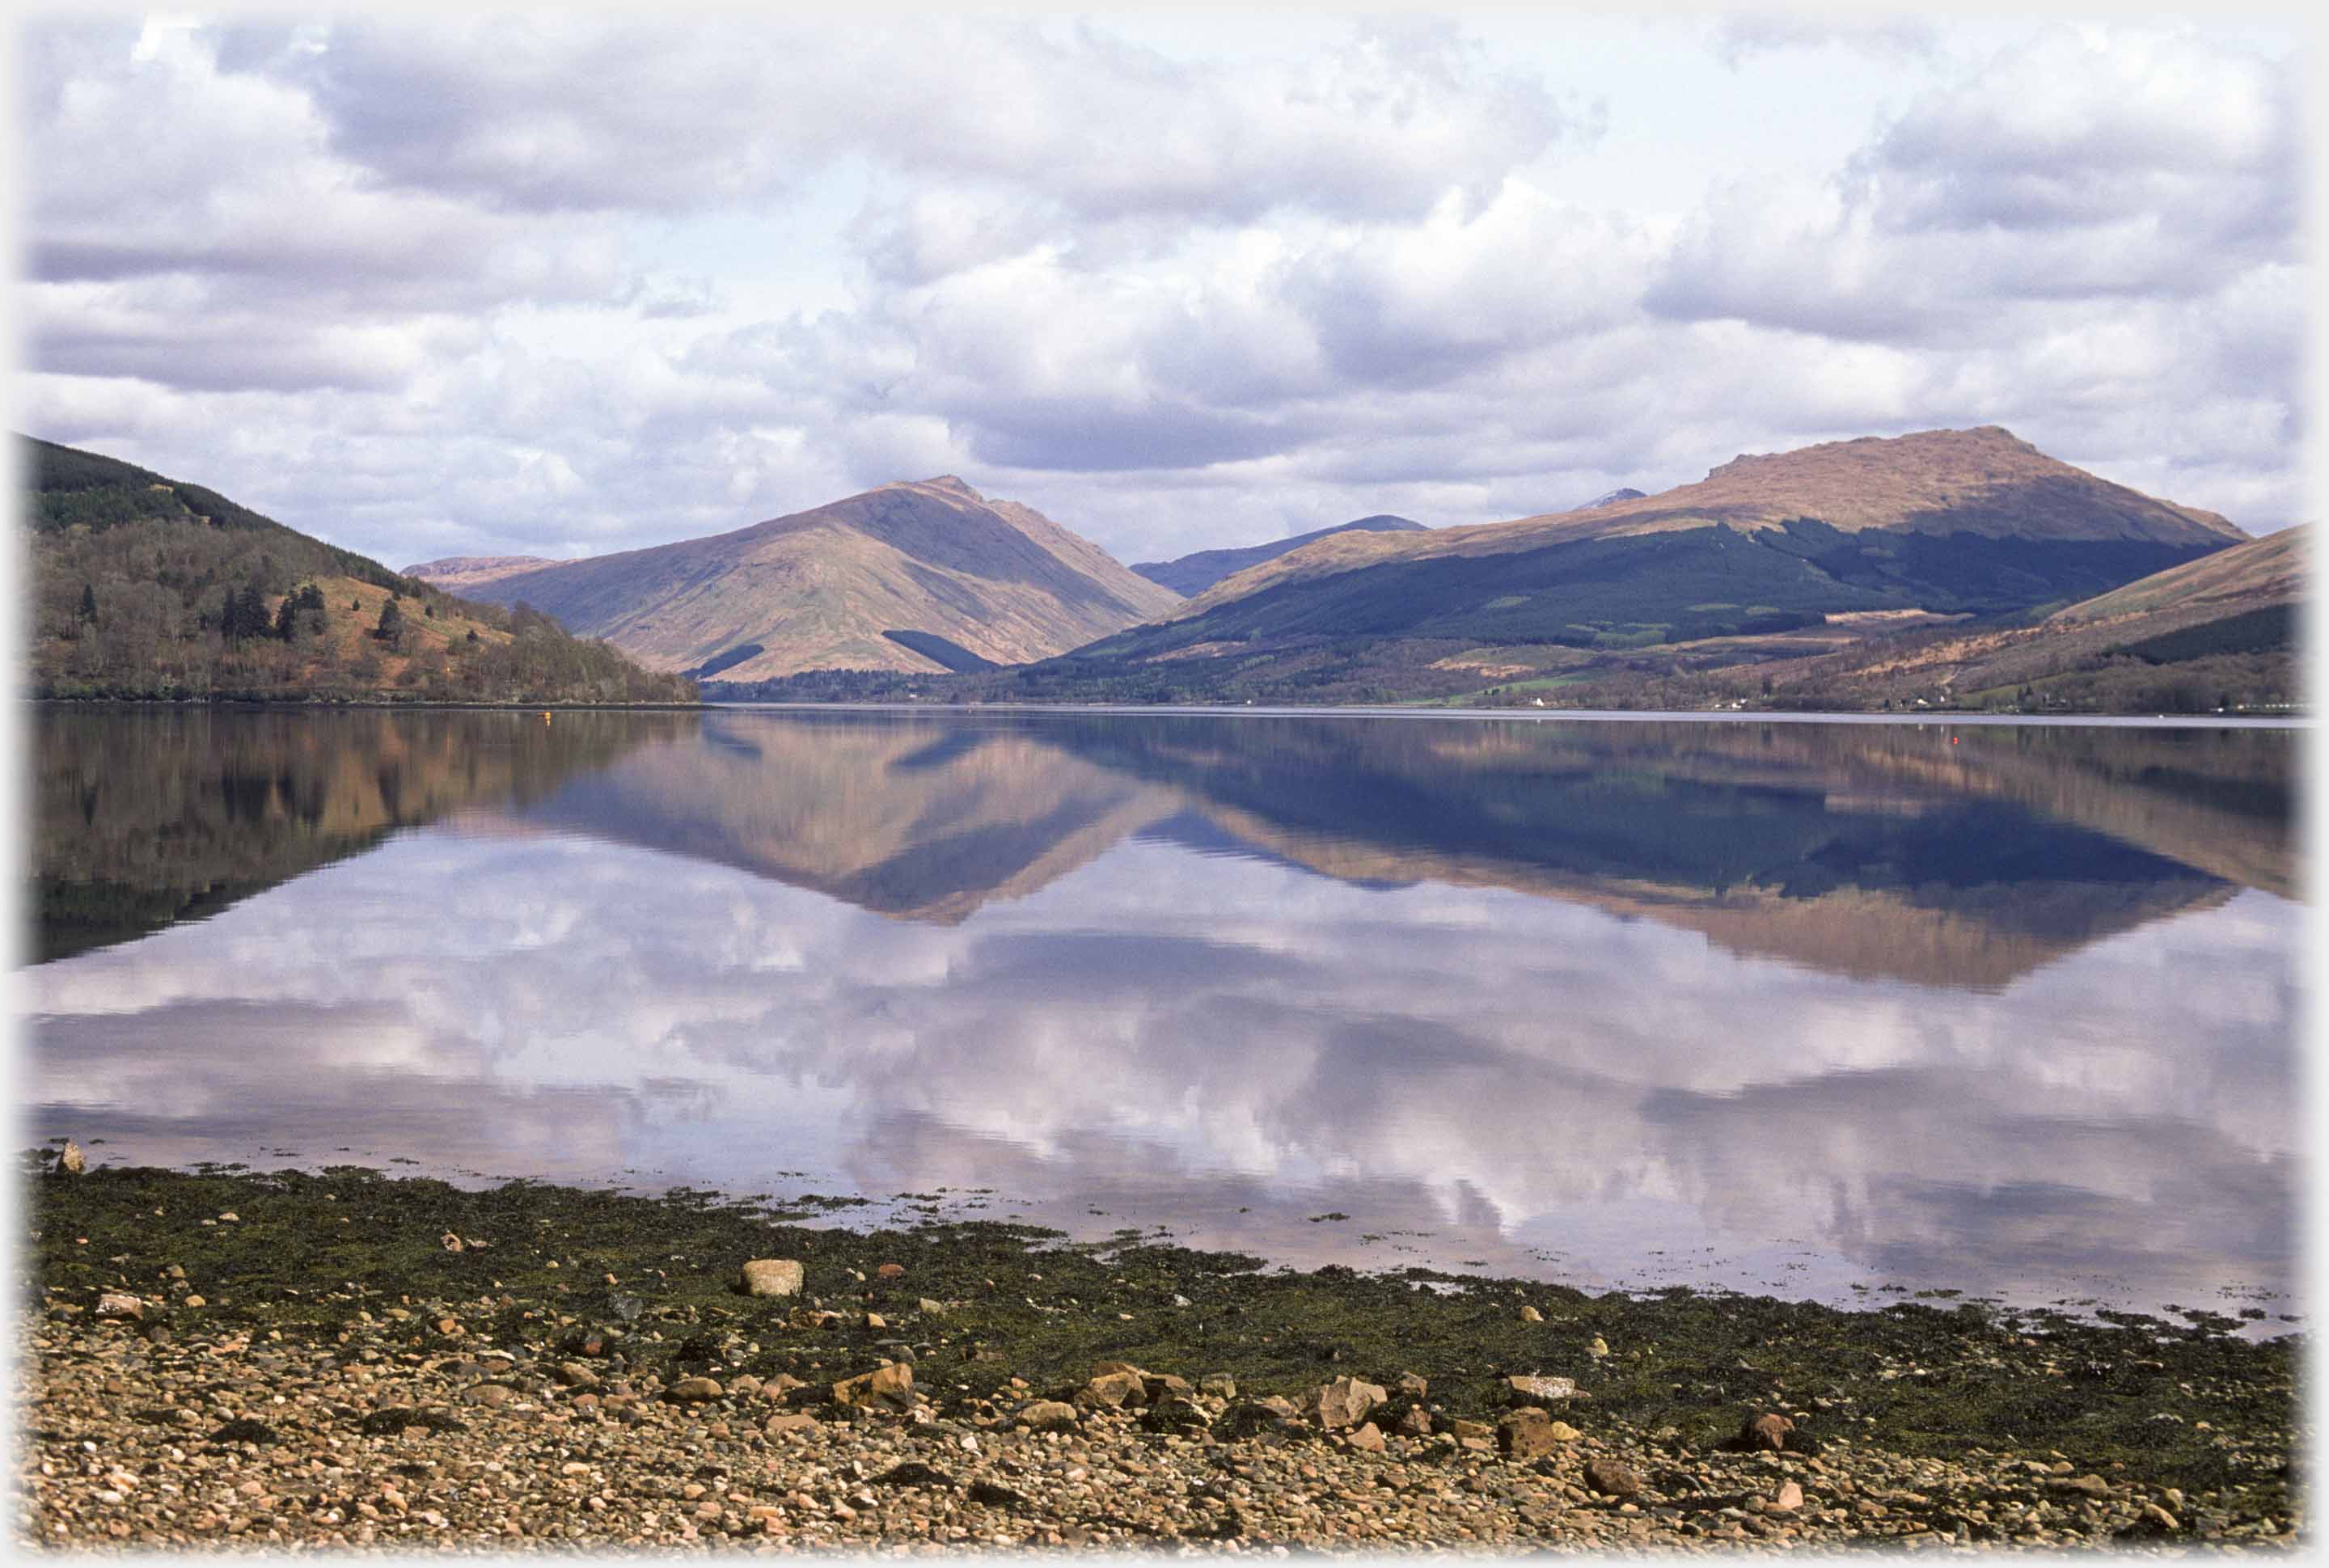 Hills reflected in flat calm water.